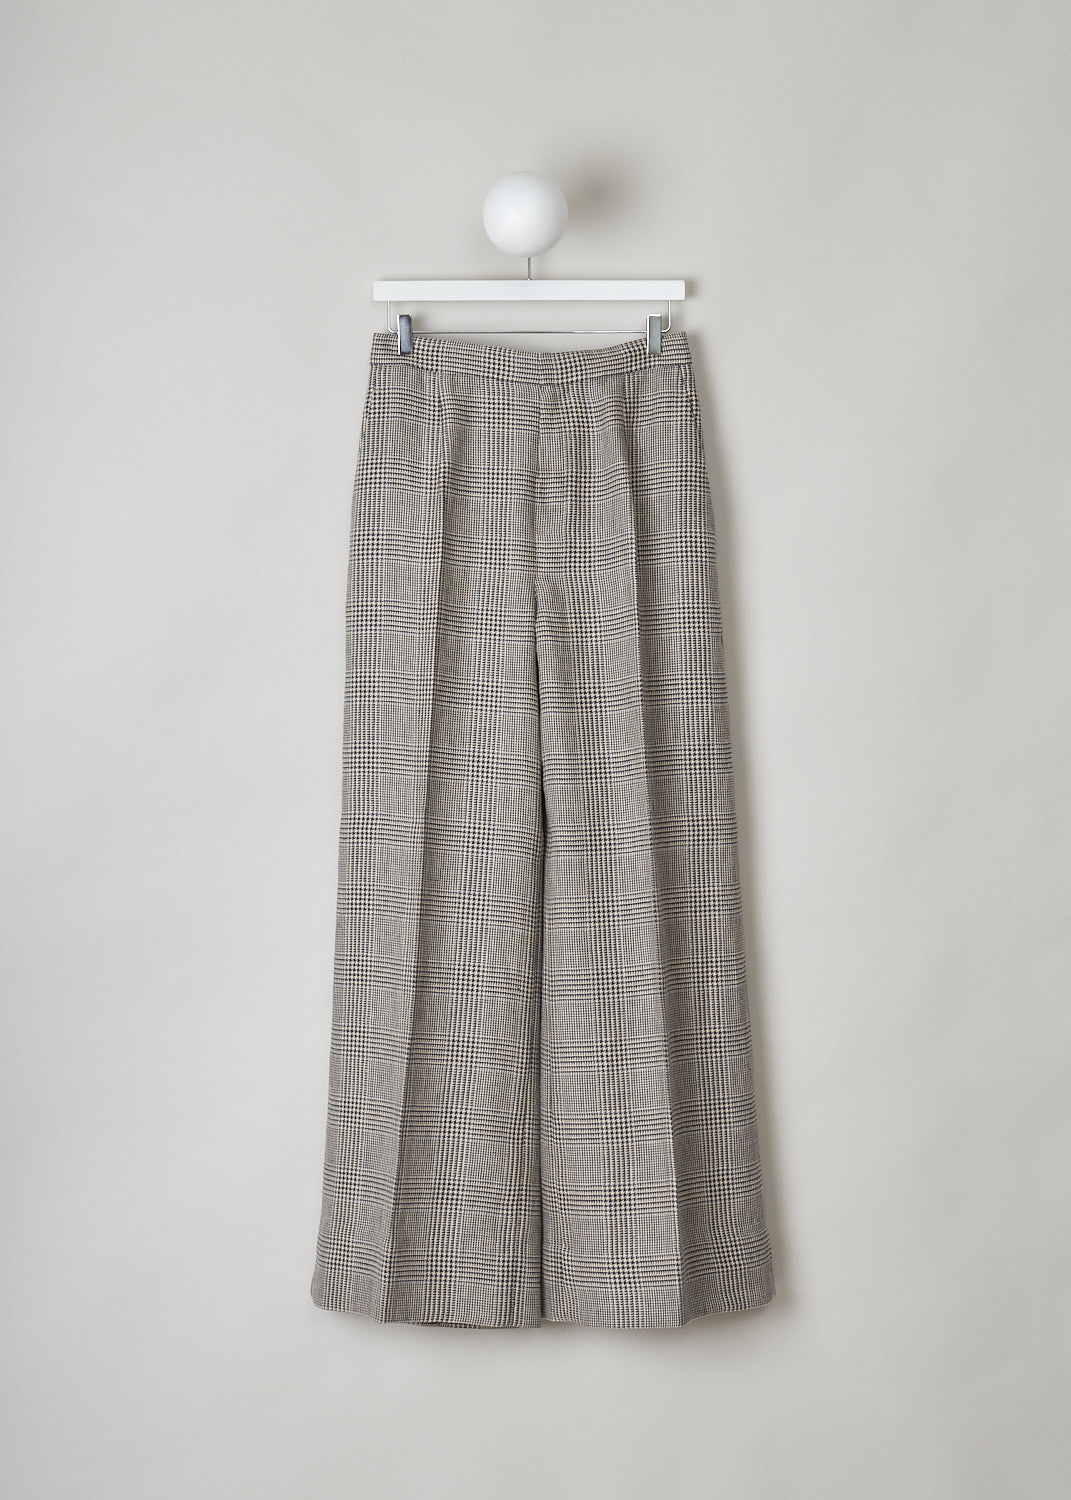 BRUNELLO CUCINELLI, BEIGE LINEN HOUNDSTOOTH PANTS, MF576P6969_C004, Beige, Print, Front, These high-waisted pants have straight wide pant legs with a beige Houndstooth pattern. The pant legs have pressed centre creases. These pants have a concealed clasp and zip closure. Slanted pockets can be found in the front and welt pockets in the back.
